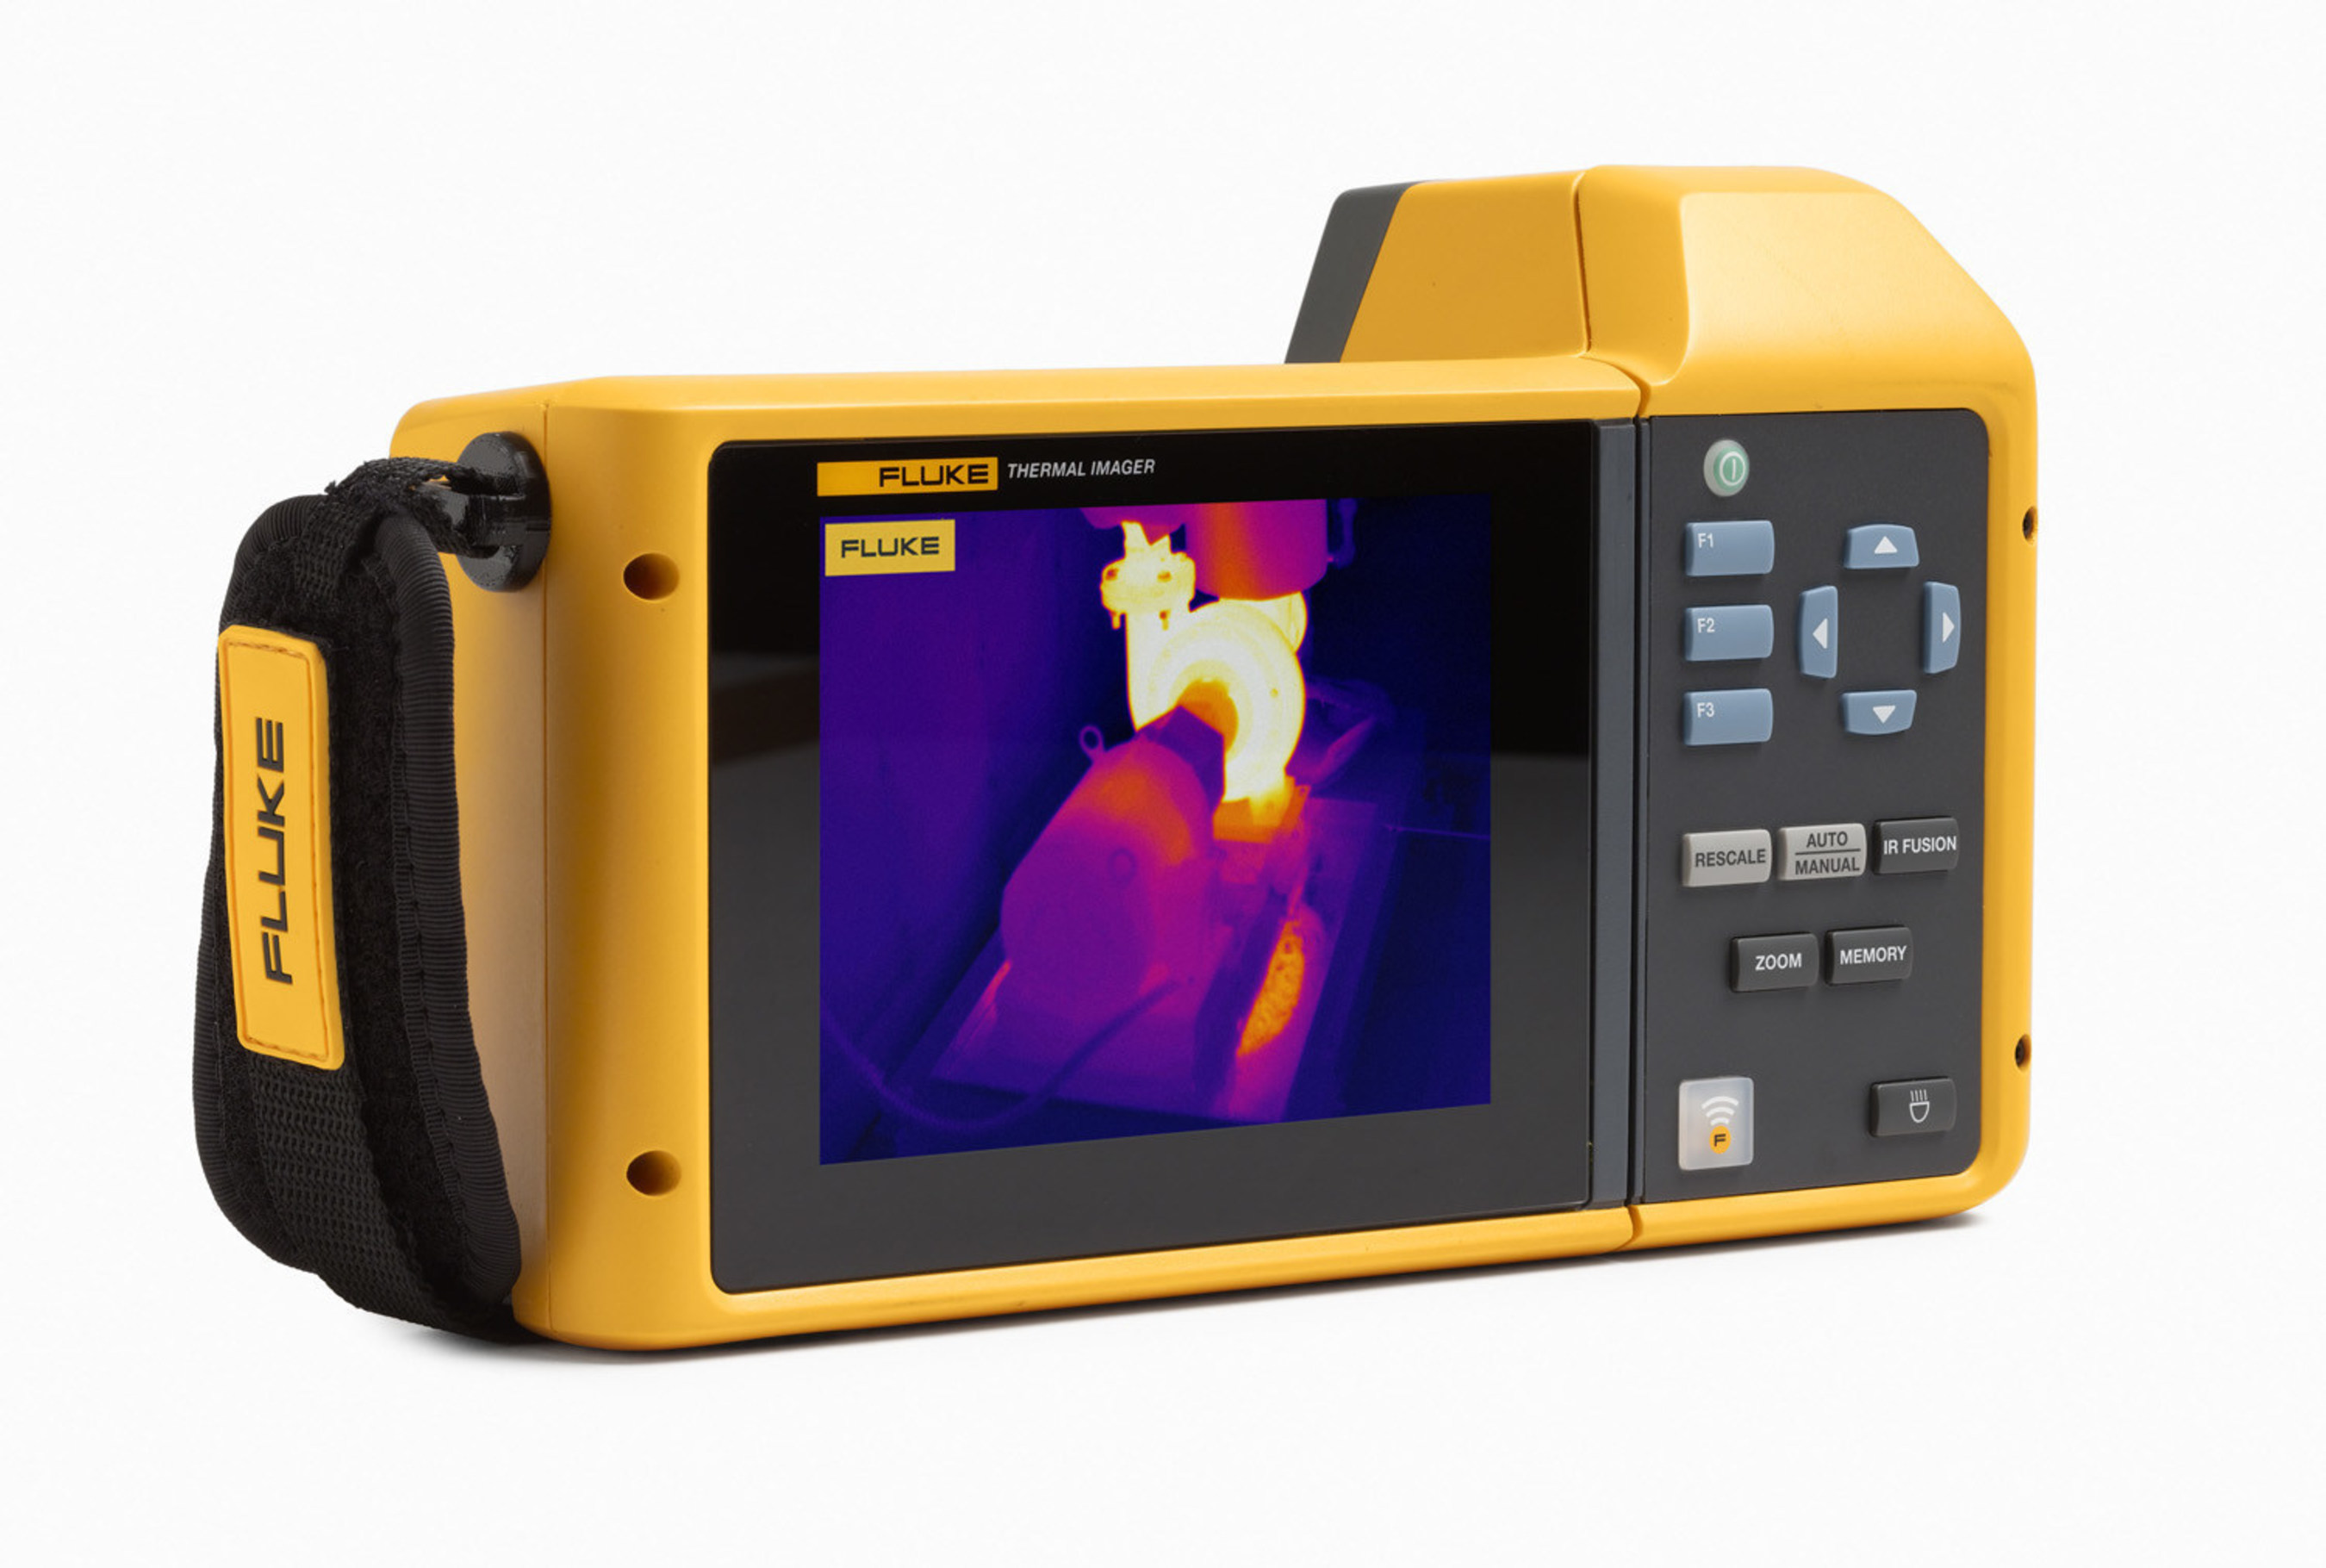 The new TiX580 Infrared Camera features a 240-degree rotating screen that allows thermographers to easily navigate over, under, and around objects to preview and capture images with ease.